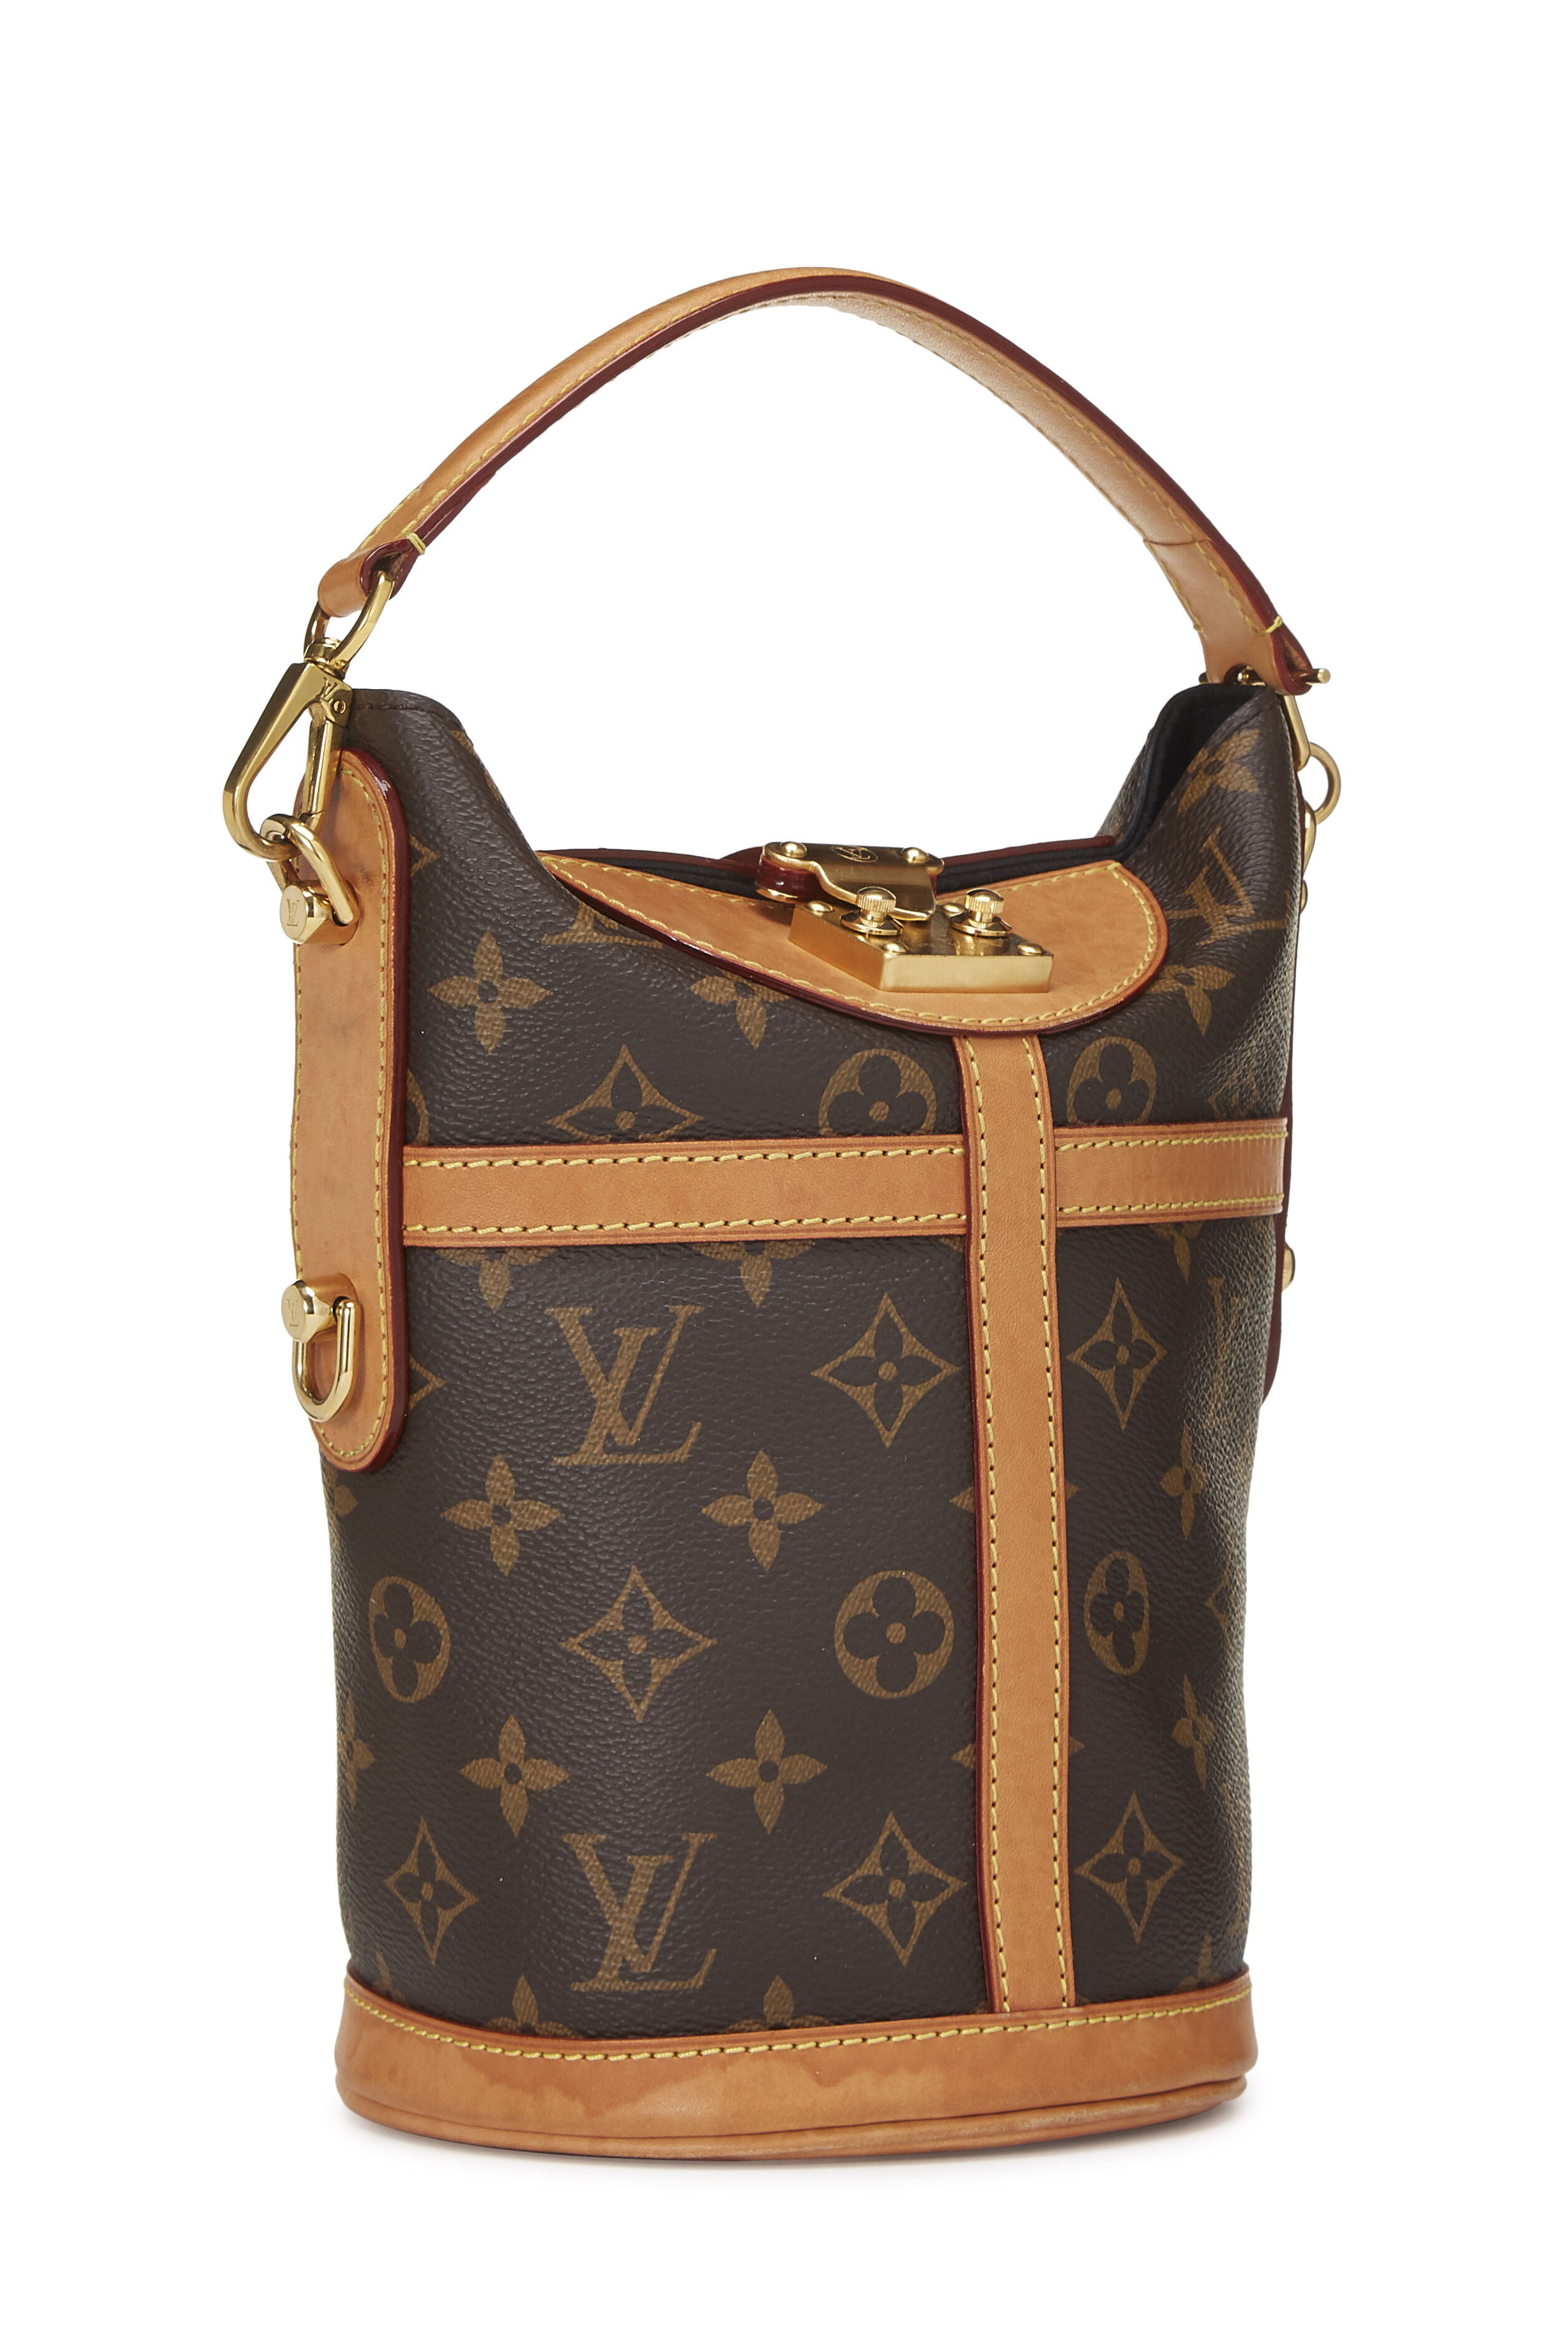 Vuitton Canvas Duffle Bag - What Goes Around Comes Around